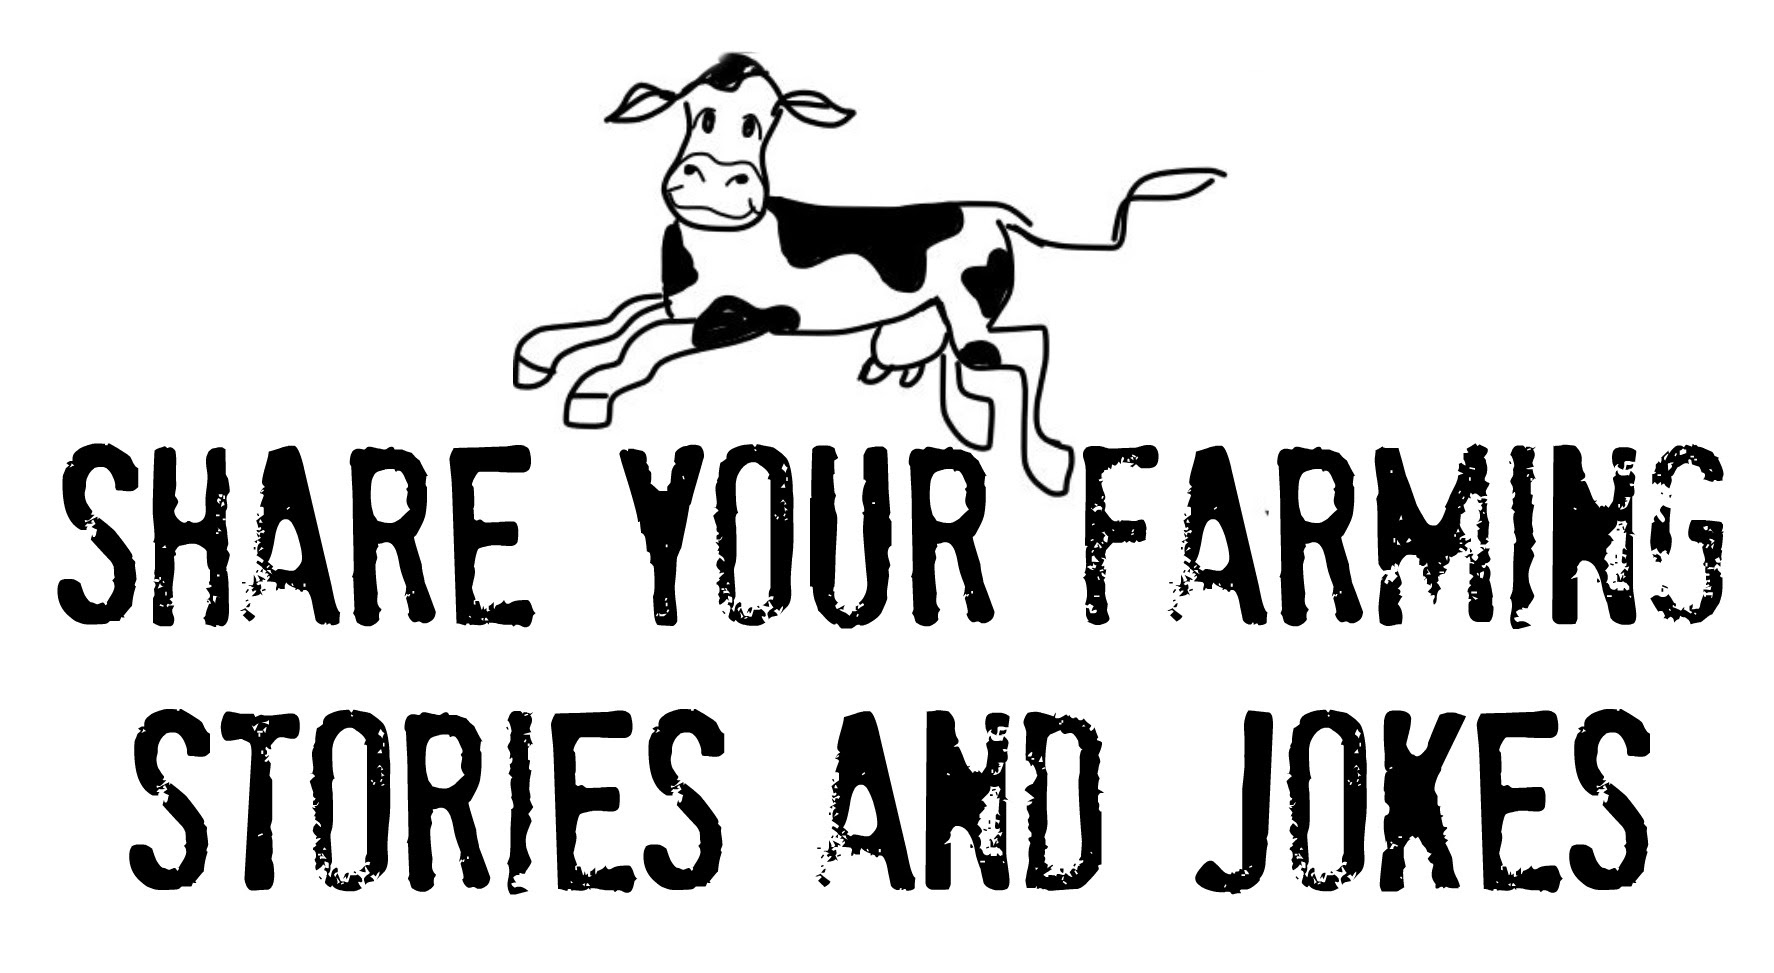 share your farming stories and jokes